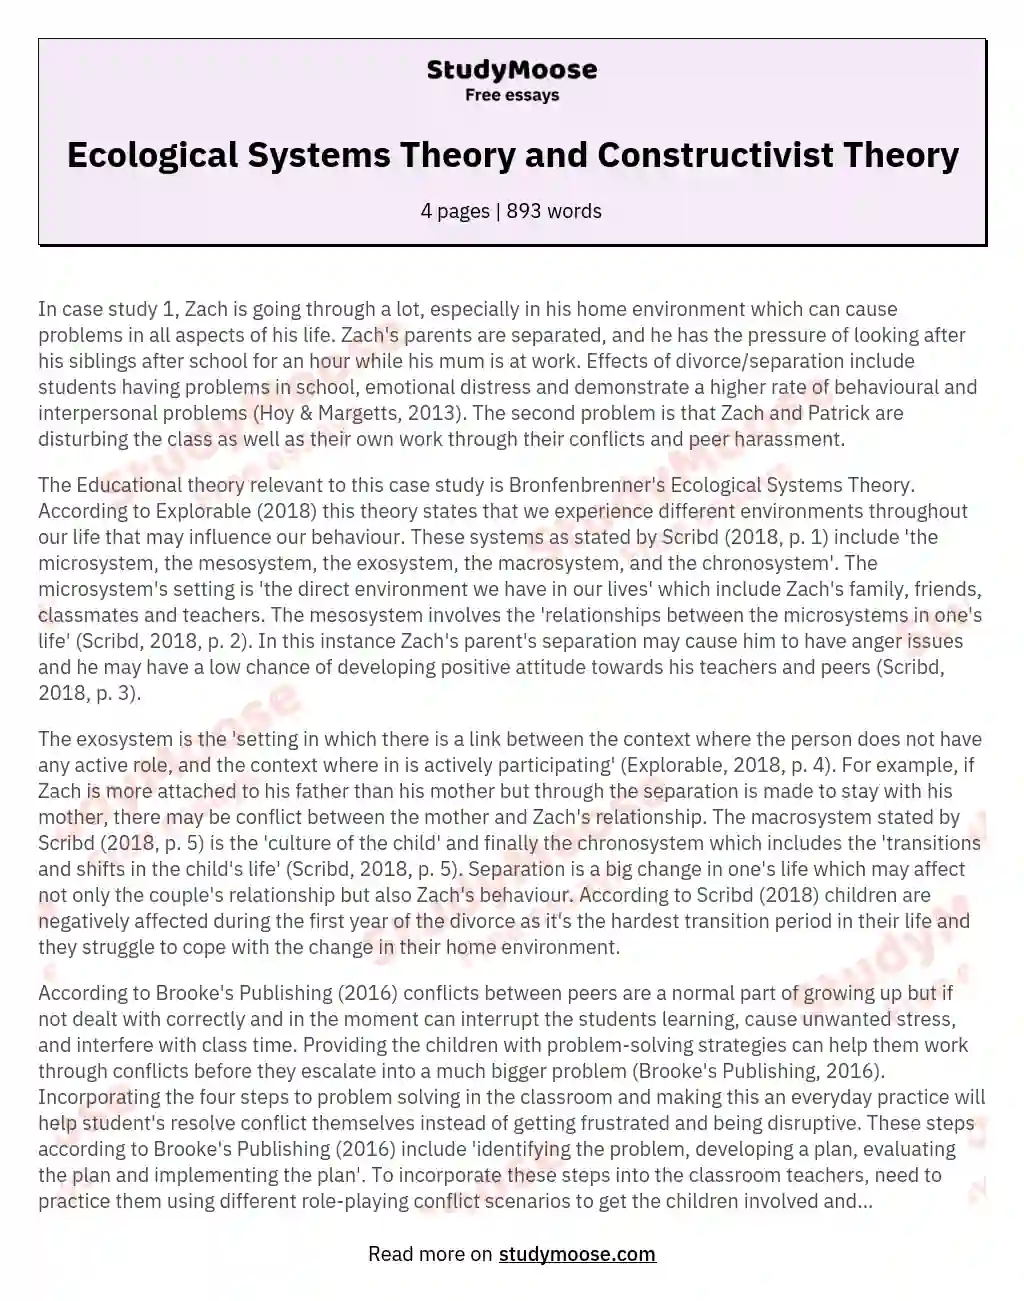 Ecological Systems Theory and Constructivist Theory essay